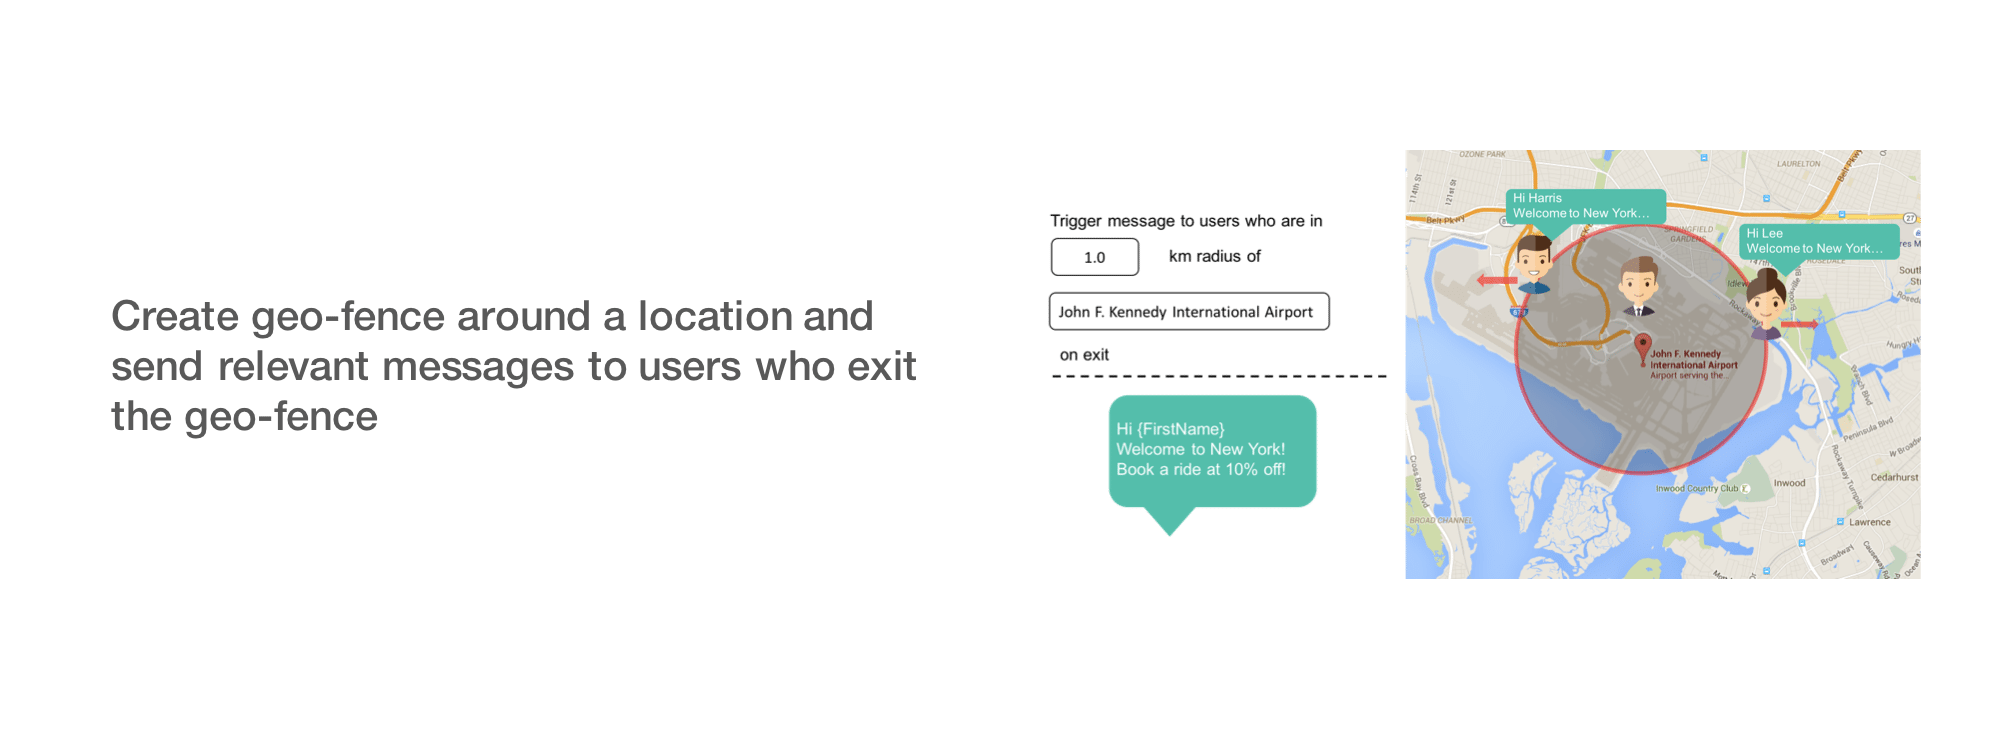 Deploy location-based marketing campaigns by creating geofences